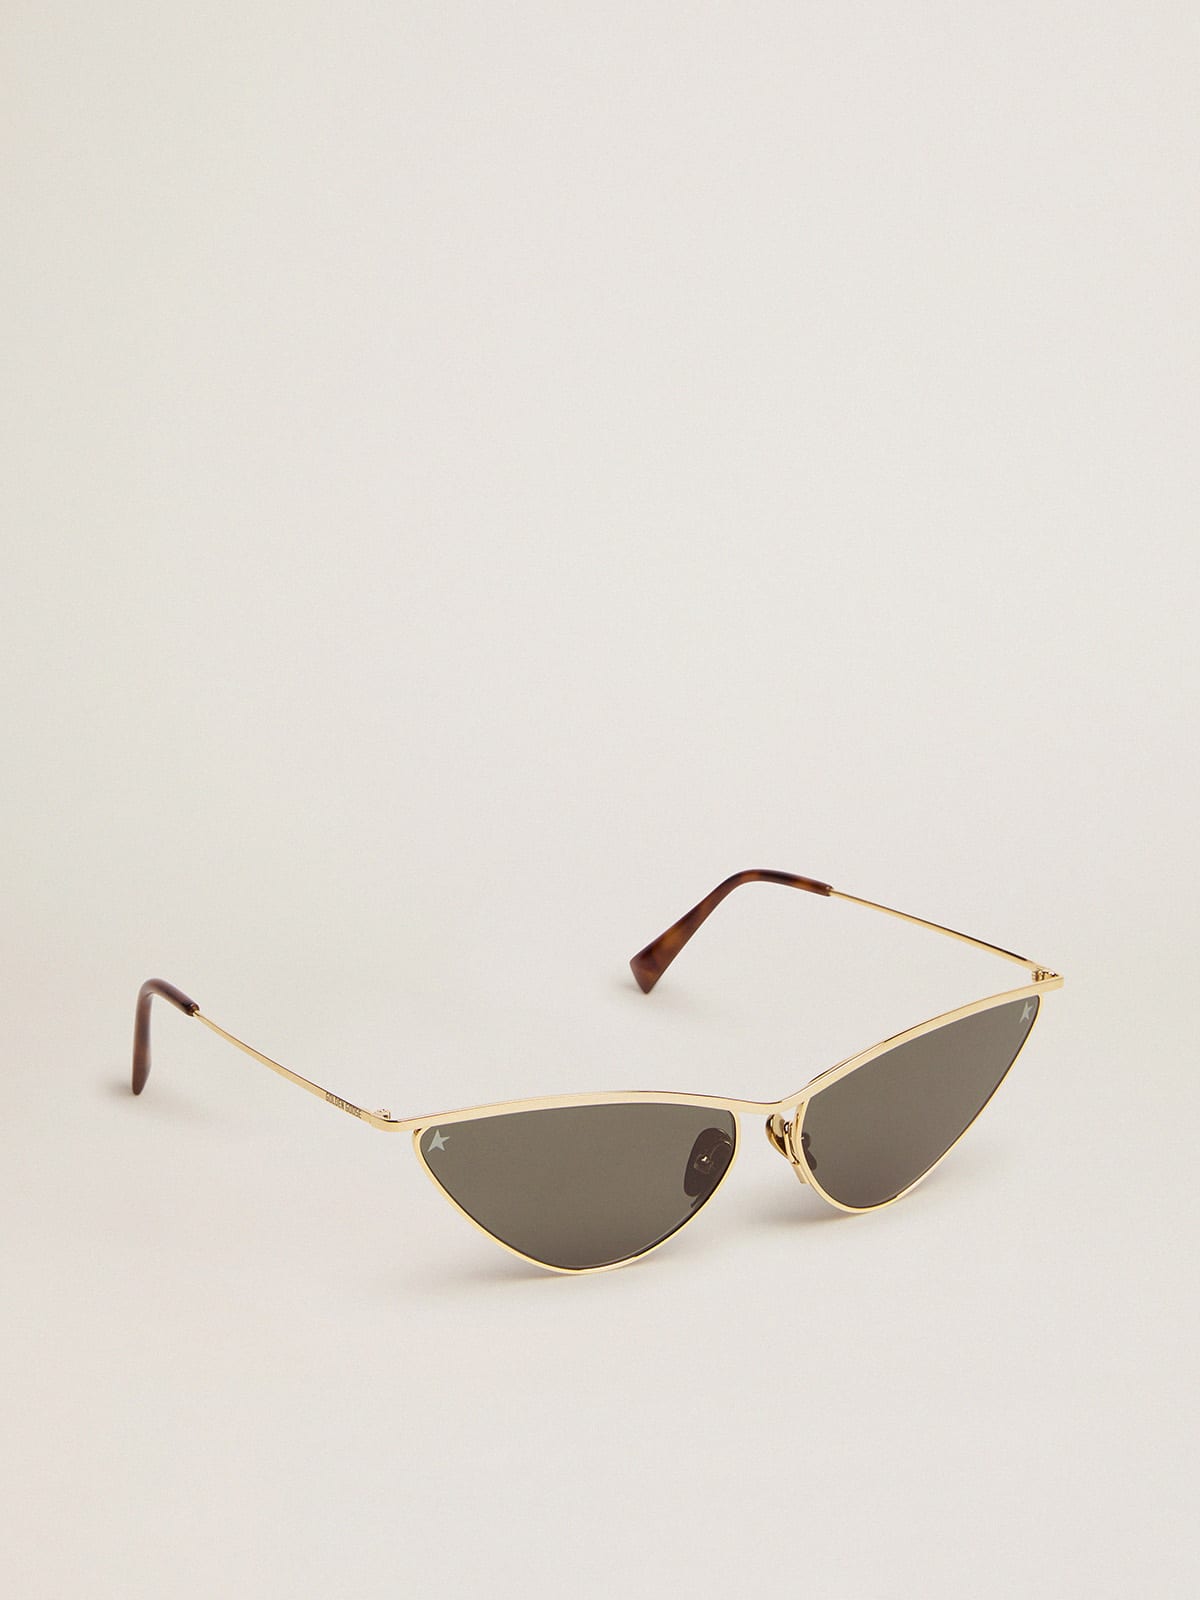 Golden Goose - Sunglasses cat-eye style with gold frame and green lenses in 